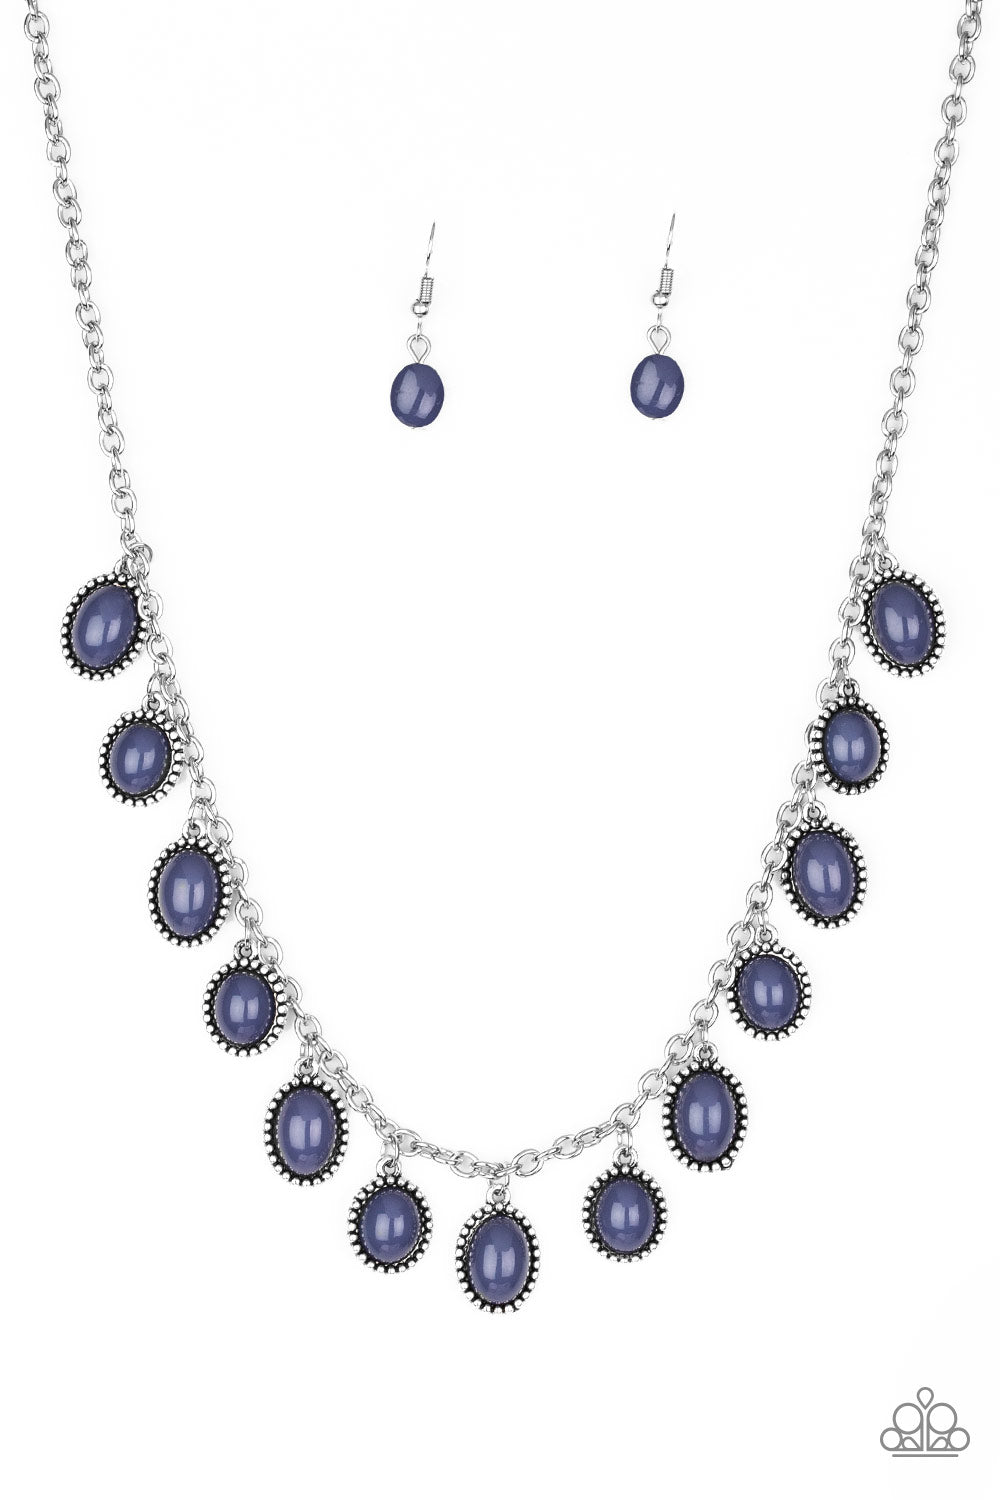 Blue necklace with beads and  silver trim.